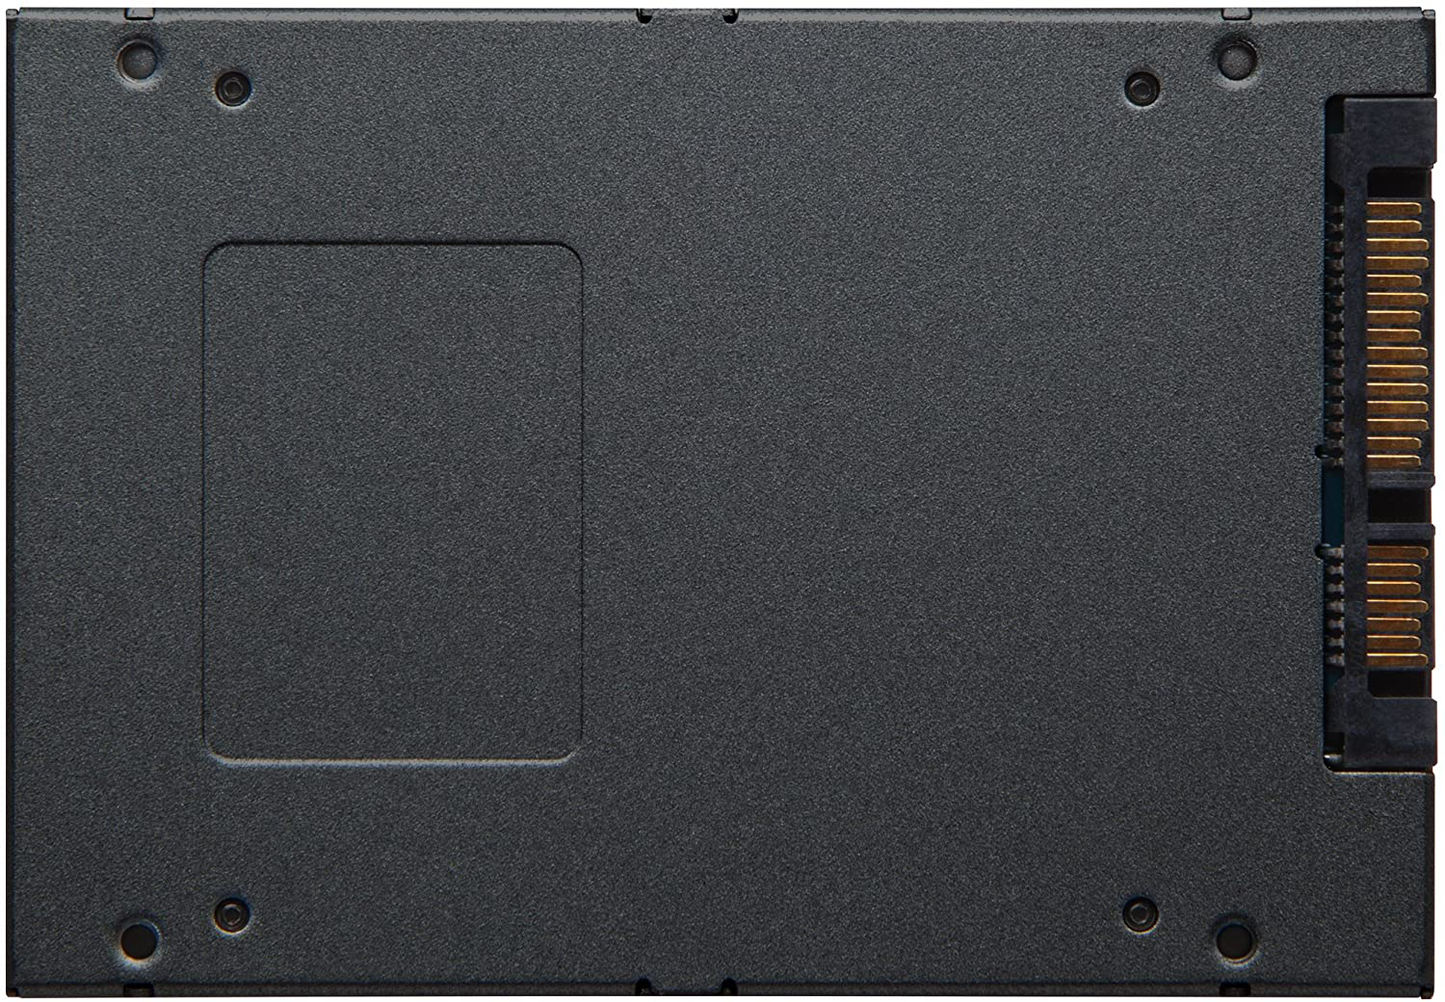 2.5" Internal SSD - HDD Replacement for Increase Performance